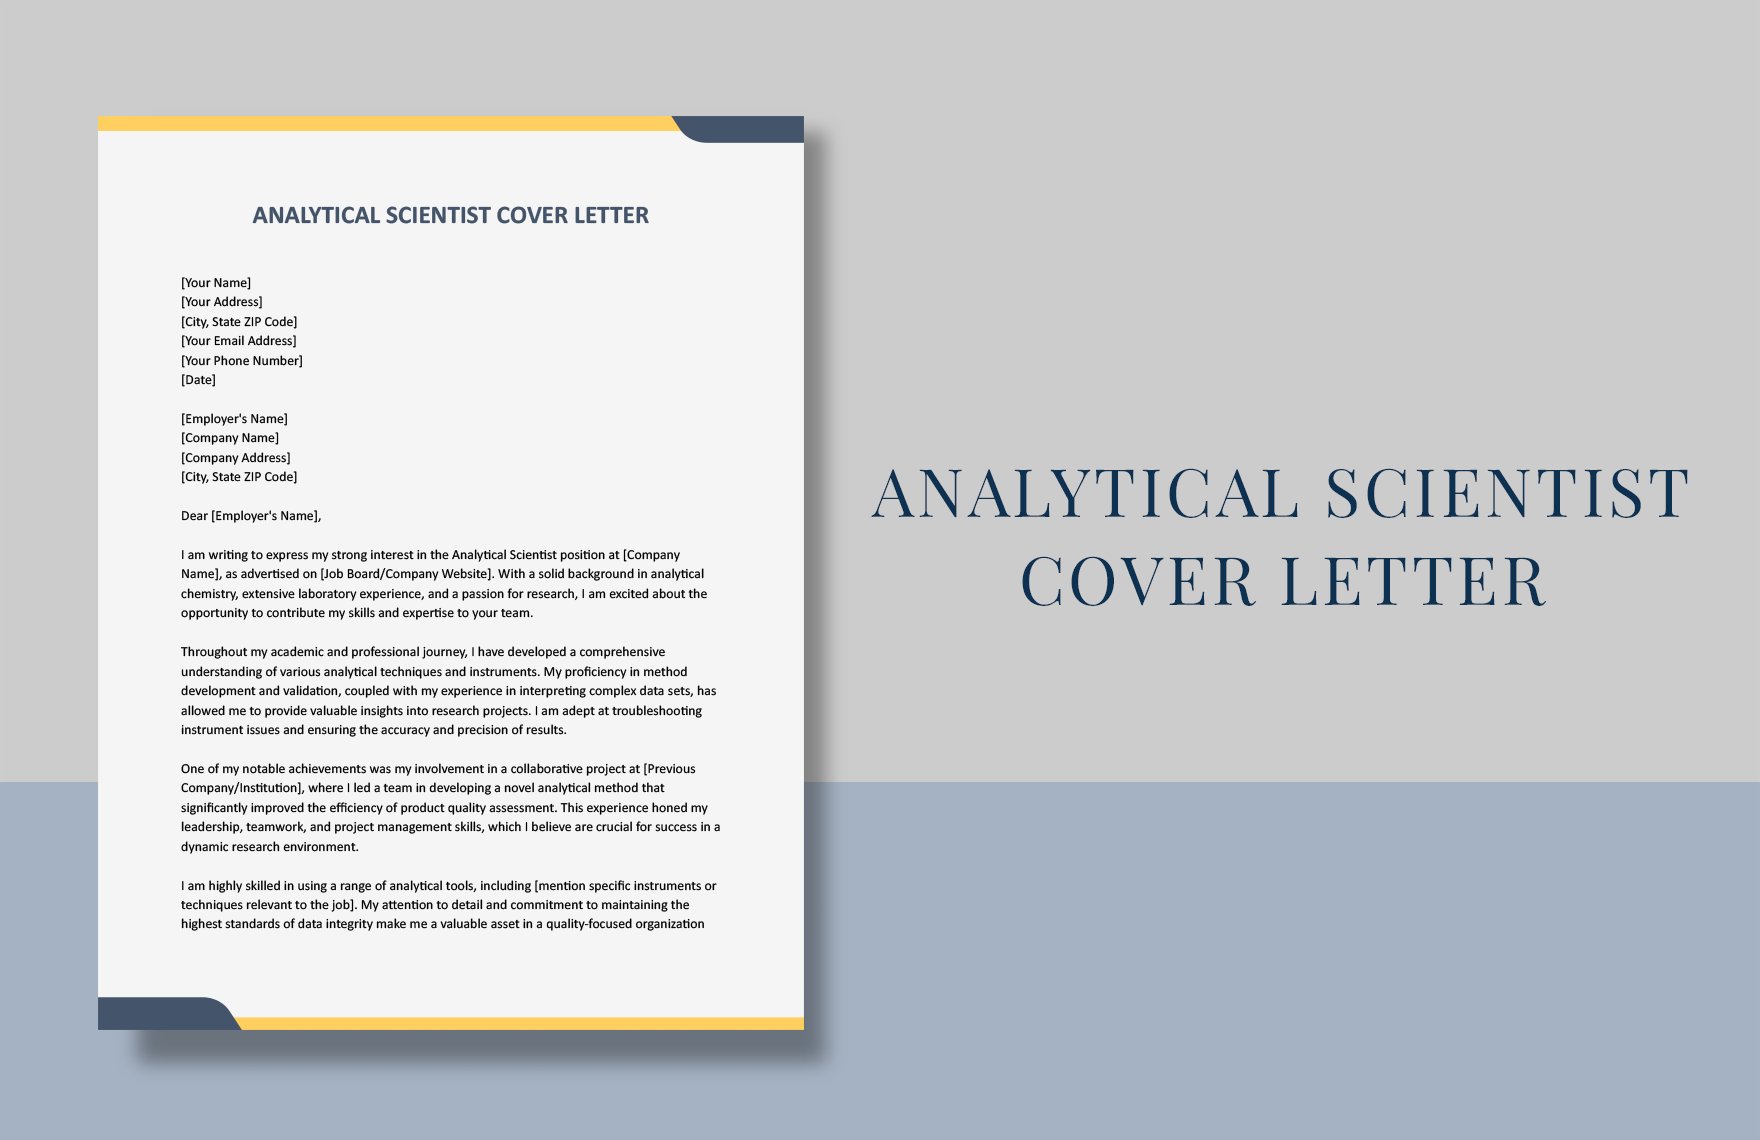 Analytical Scientist Cover Letter in Word, Google Docs